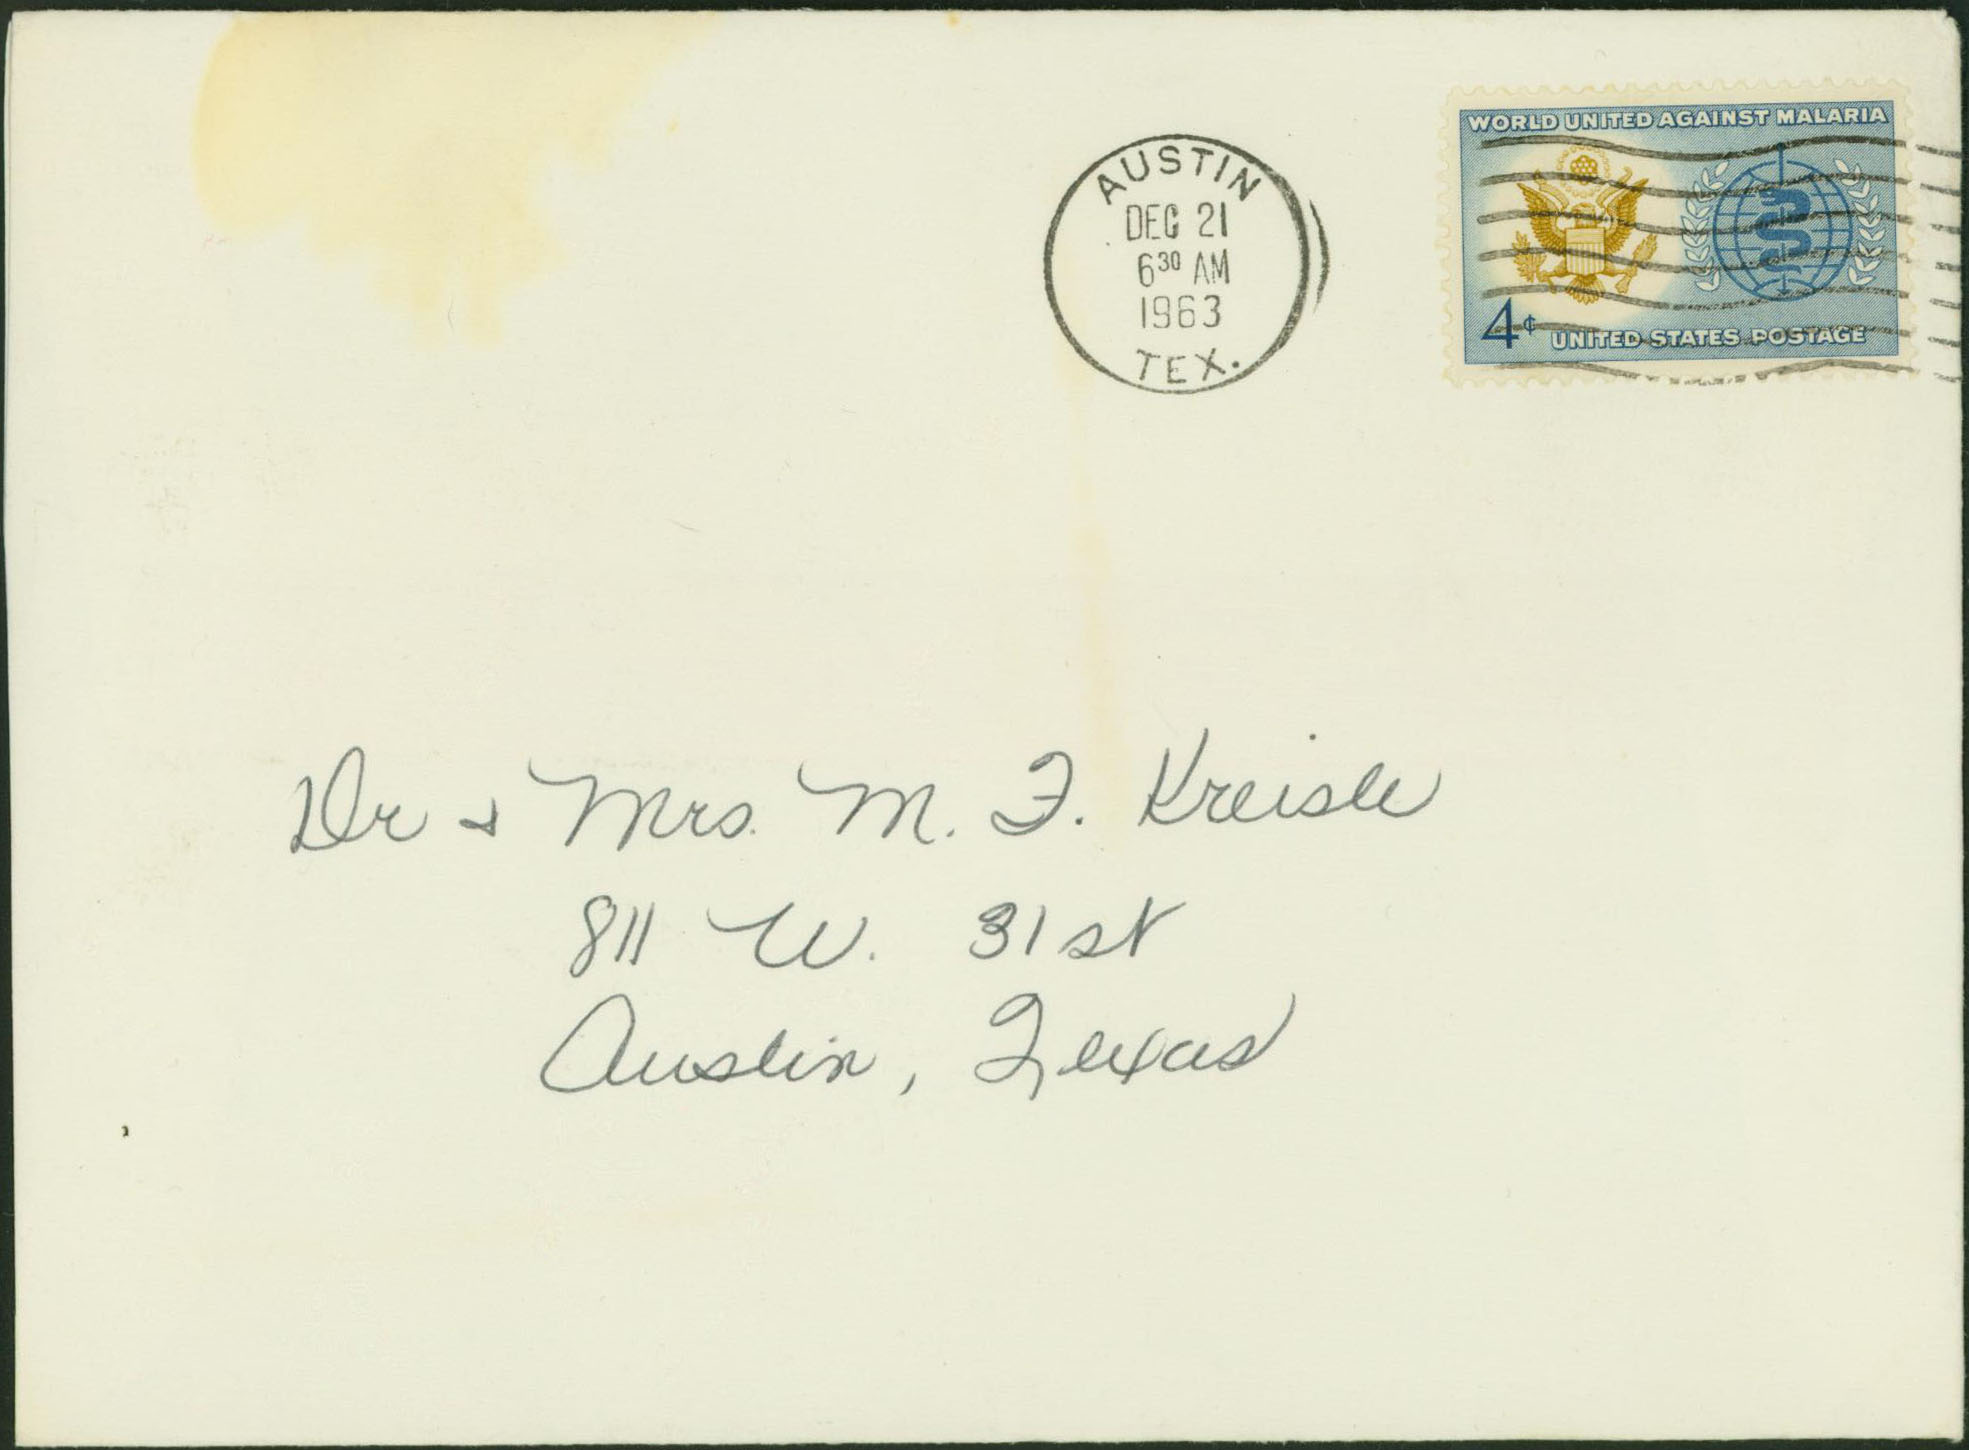 1963, December 21st, 6:30 AM. Austin, TX to Austin, TX (holiday card sent in an unsealed envelope.)